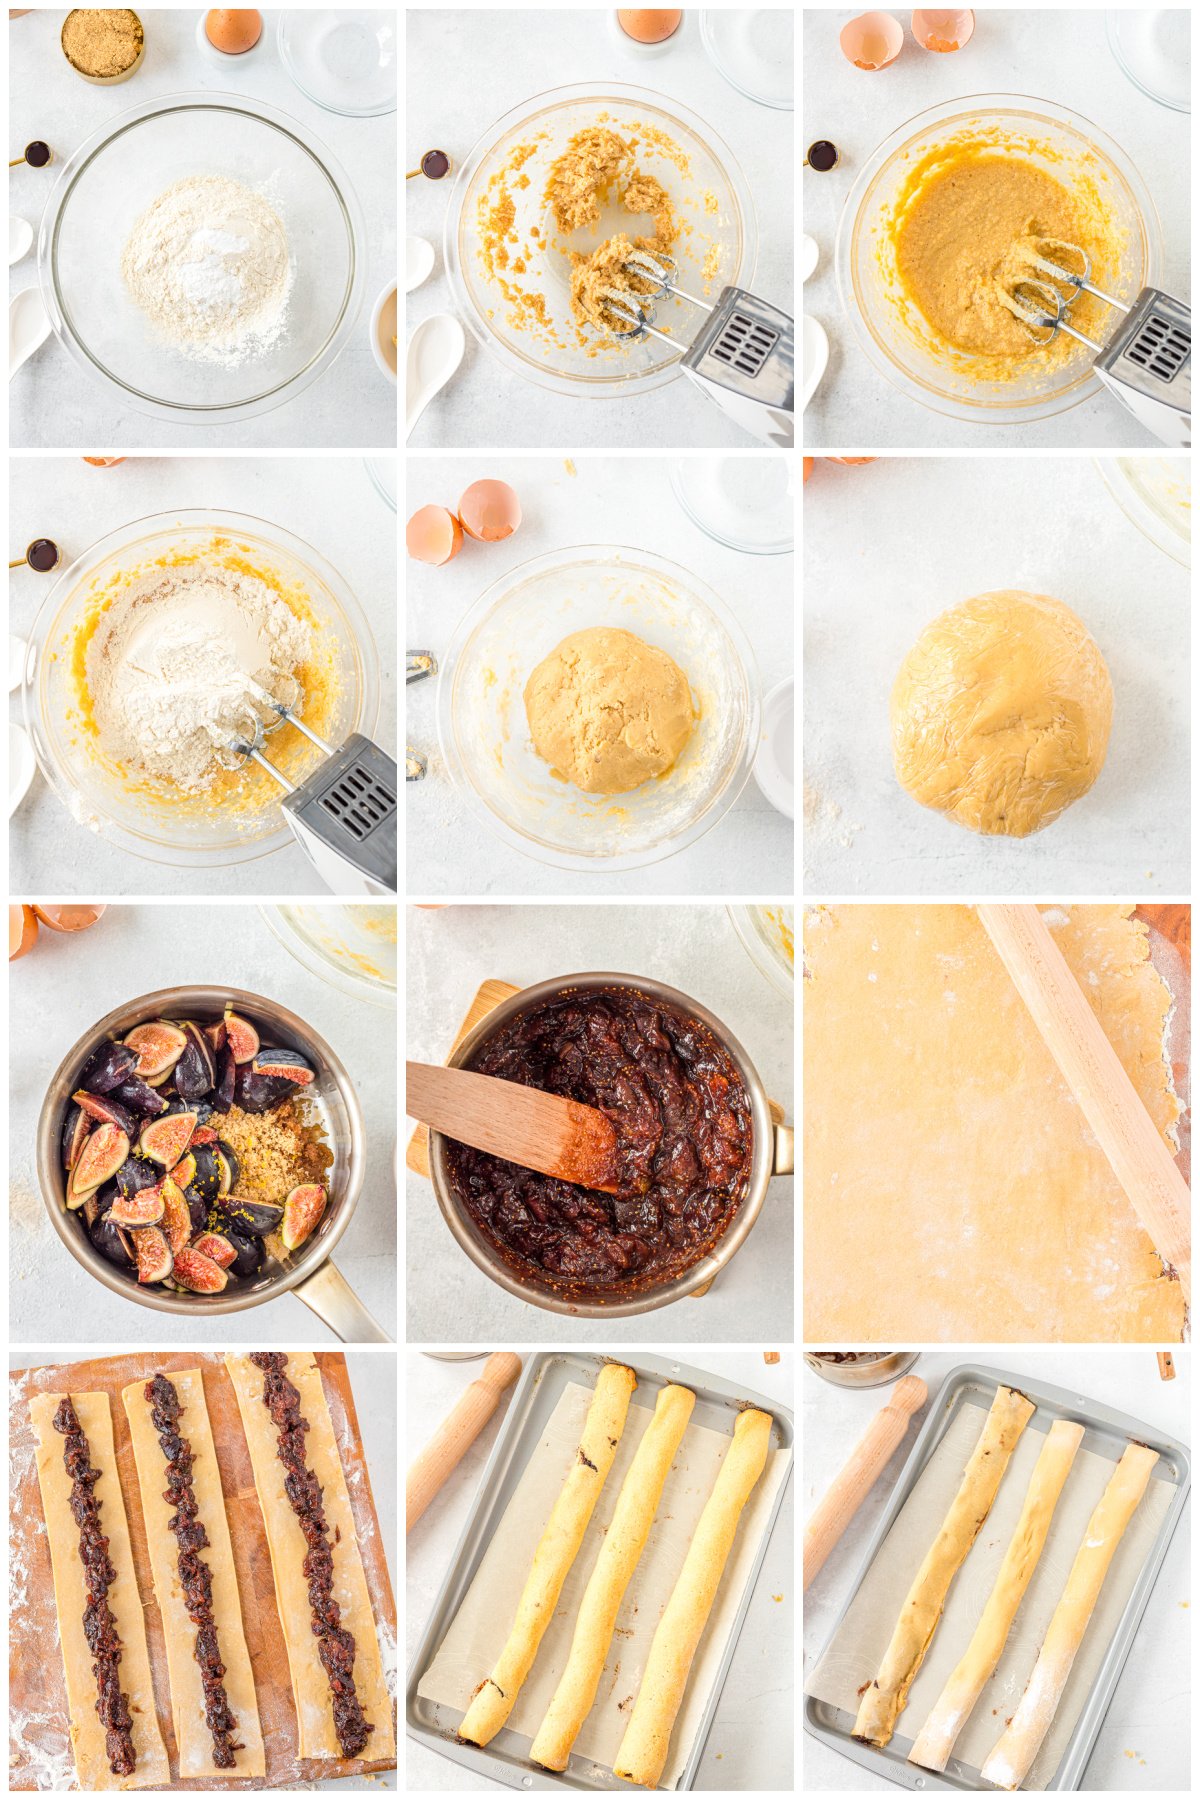 Step by step photos on how to make a Fig Newton Recipe.